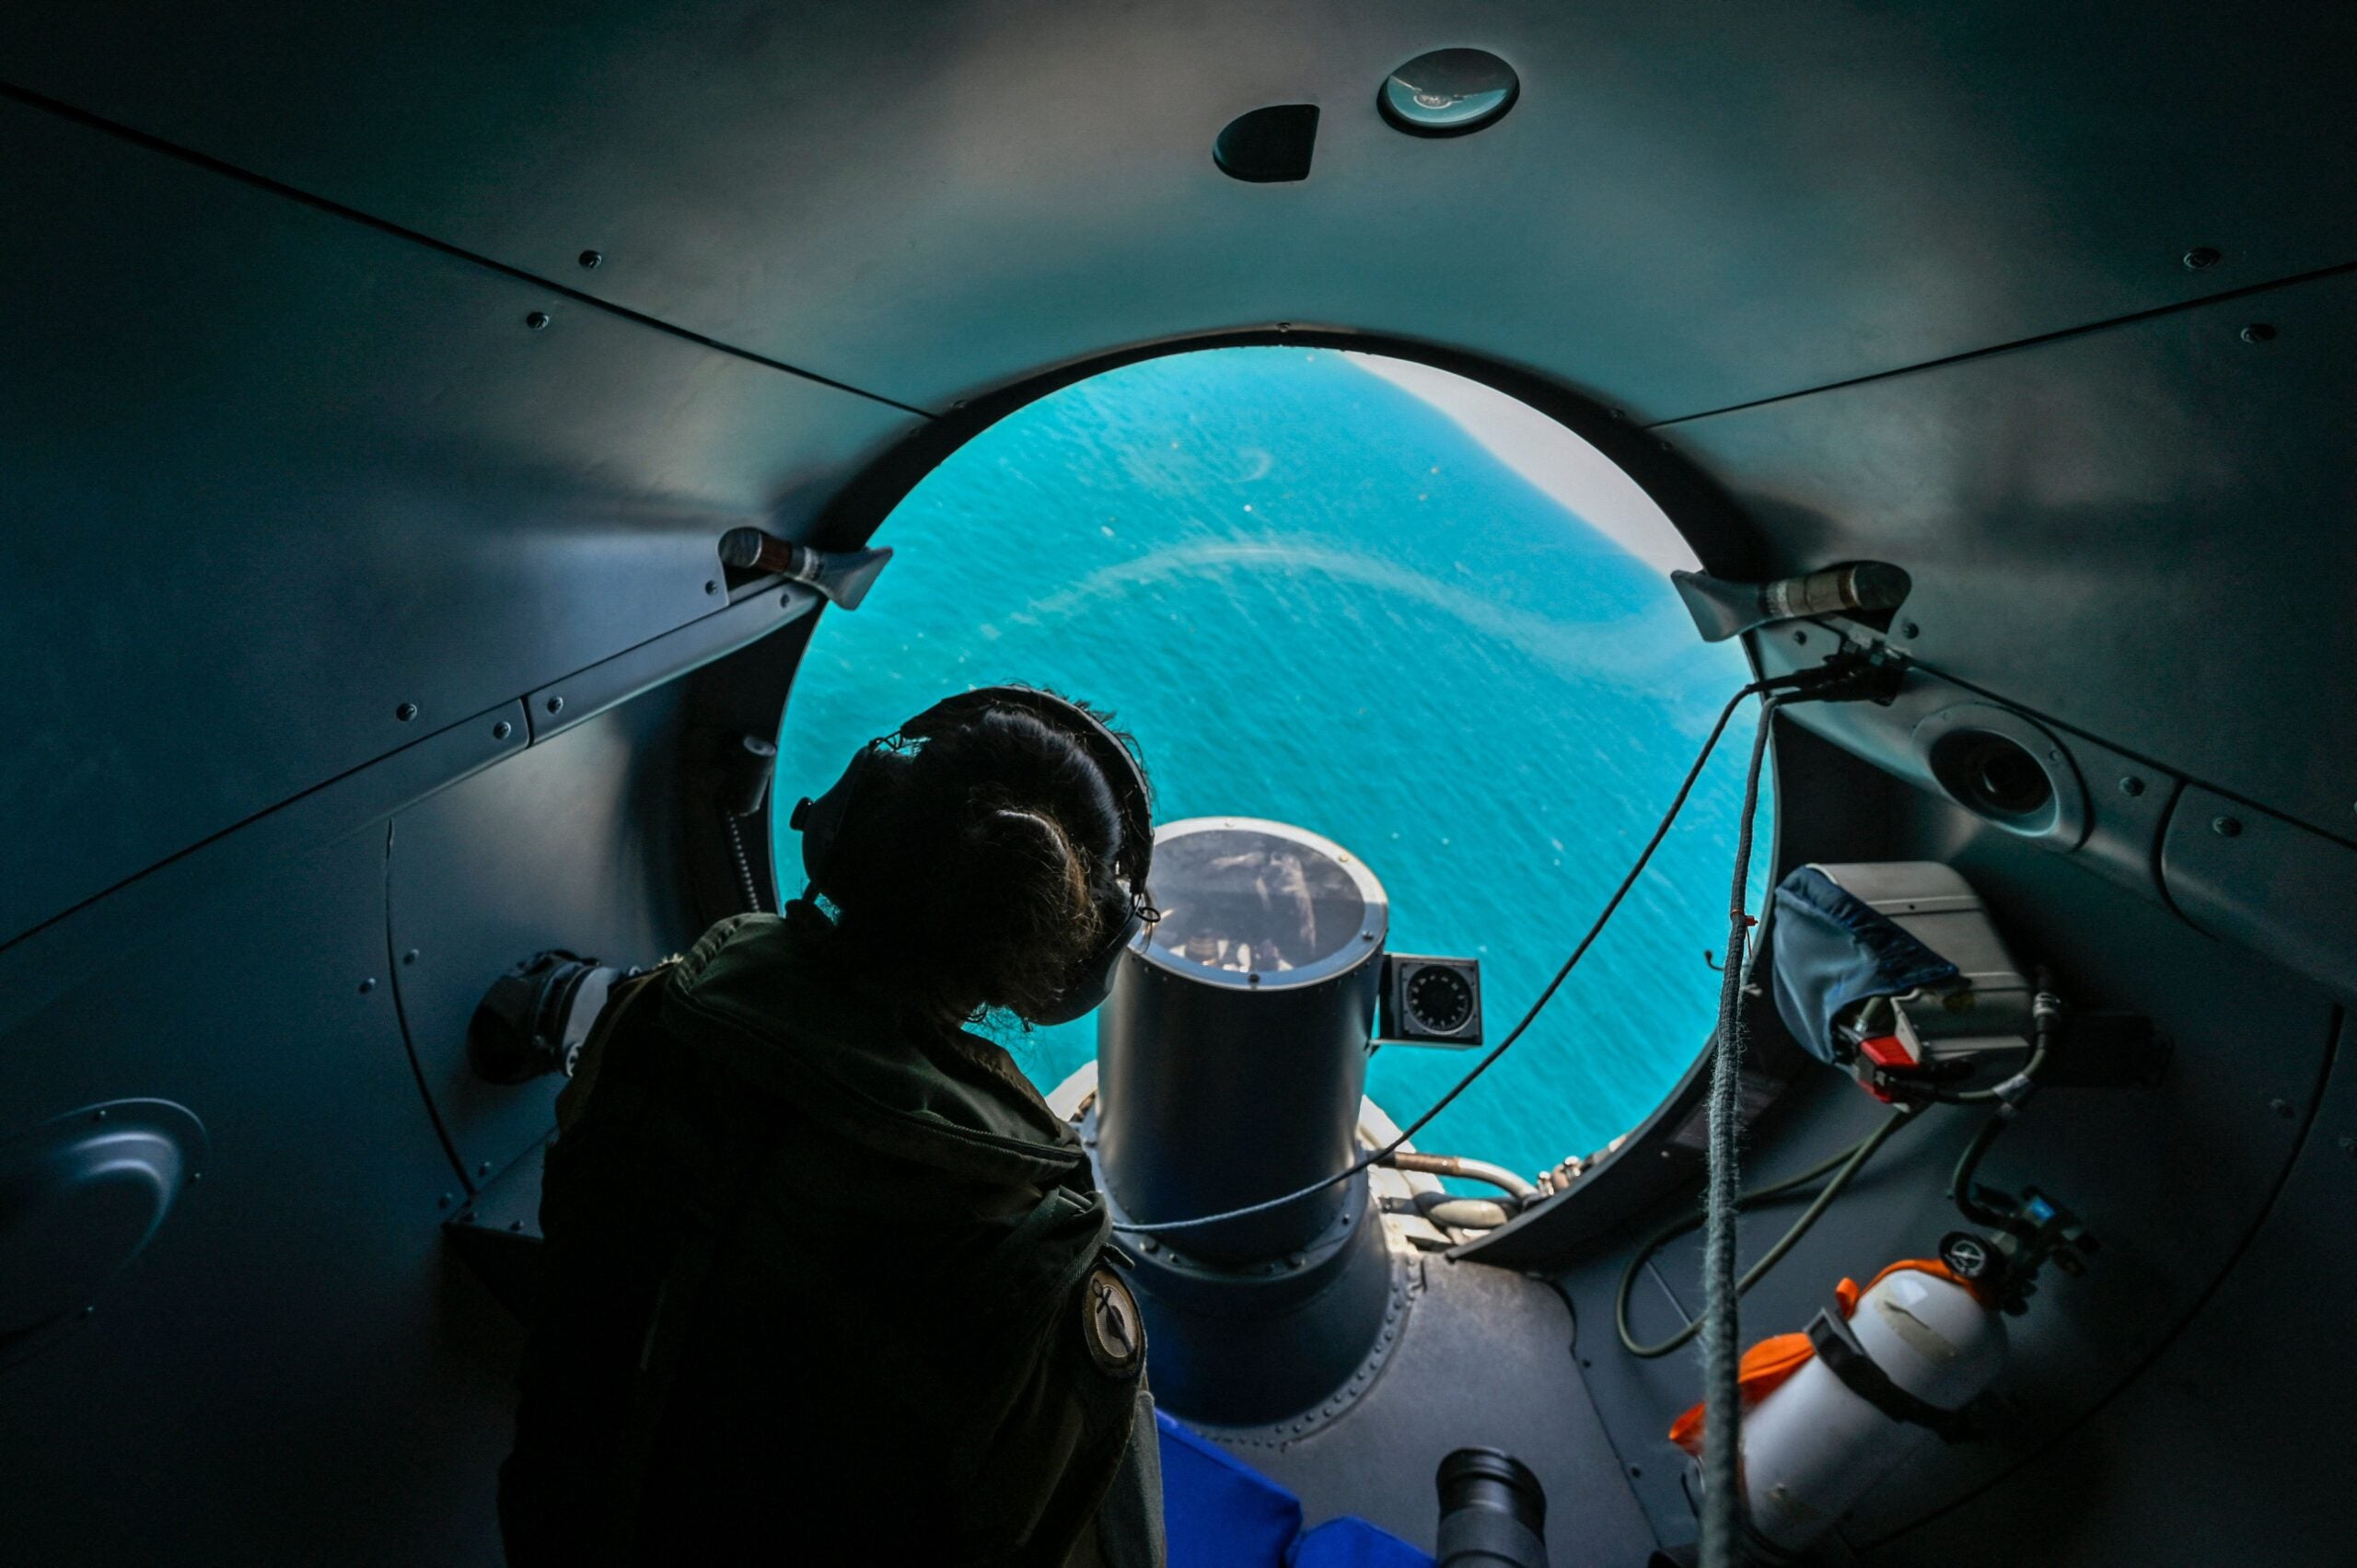 A crew member watches from onboard French long-range maritime patrol aircraft Atlantique 2 (ATL 2 ) as it flies over the Black Sea Black sea on July 21, 2022. - The Altantique 2 navy patrol airplane takes part in the annual Breeze naval exercise in the Black Sea , off the coast of Bulgaria, with participation of eleven NATO member coutries. (Photo by Louisa GOULIAMAKI / AFP) (Photo by LOUISA GOULIAMAKI/AFP via Getty Images)